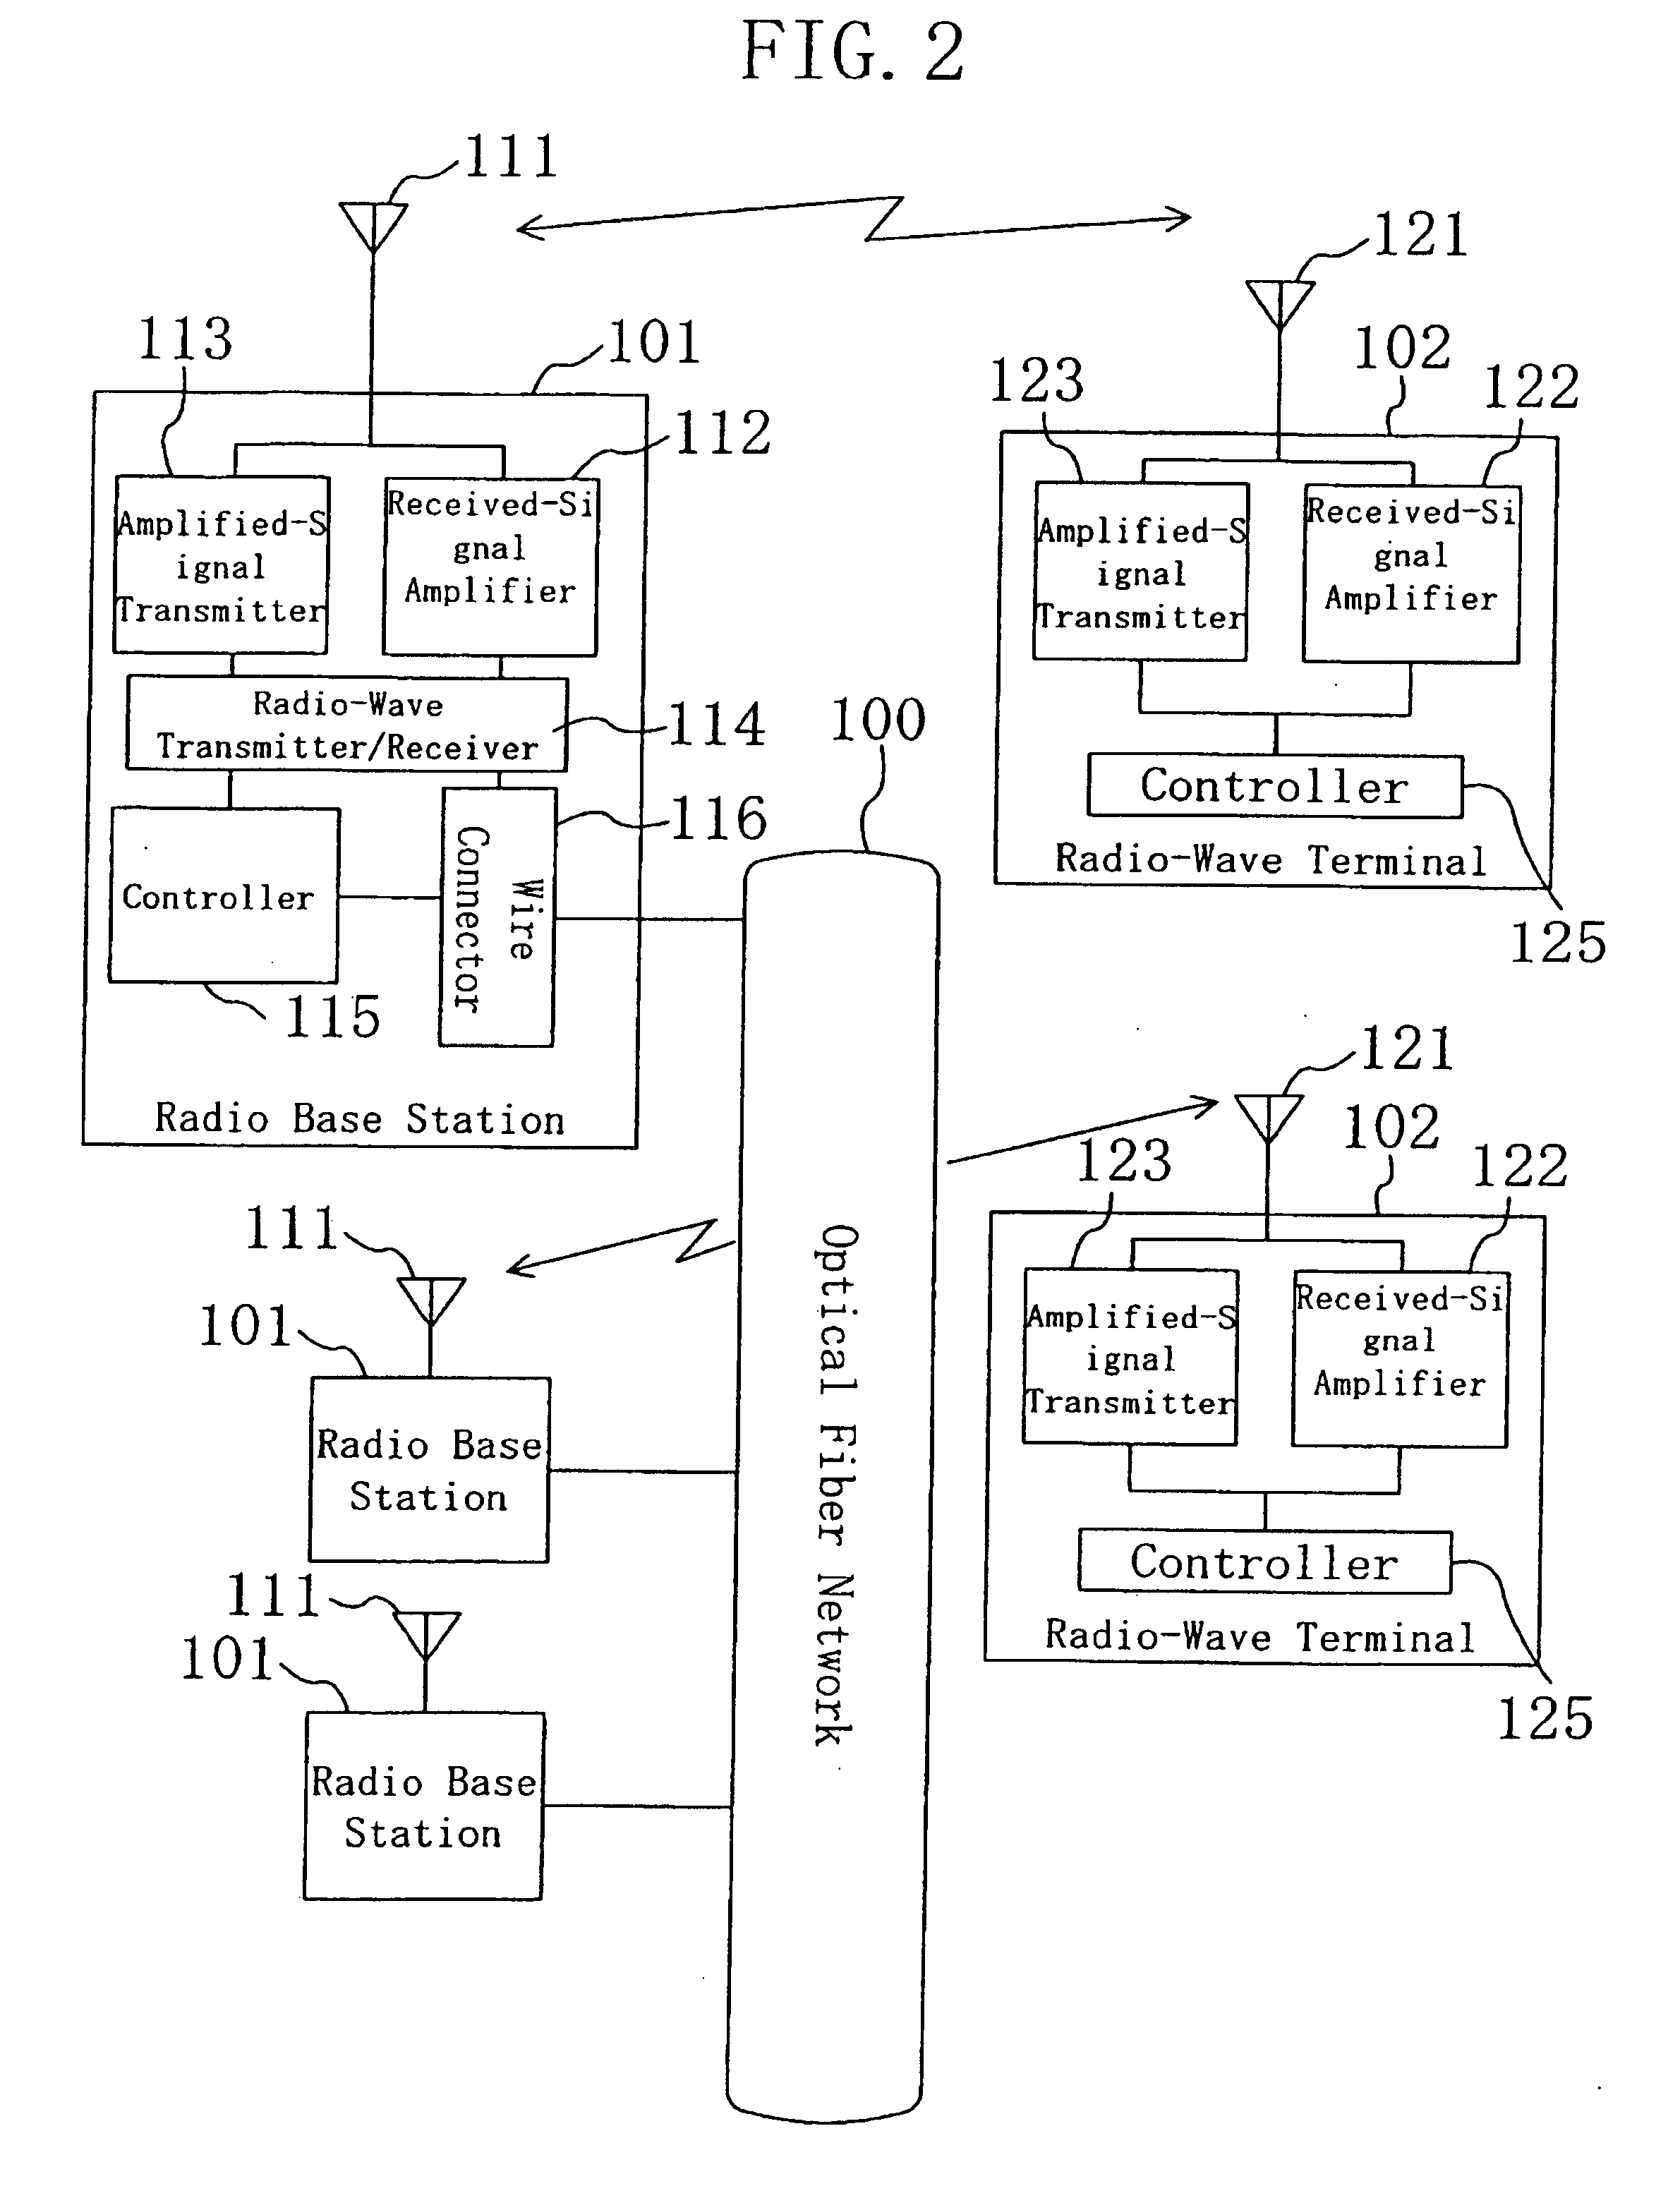 Semiconductor device having a high breakdown voltage for use in communication systems